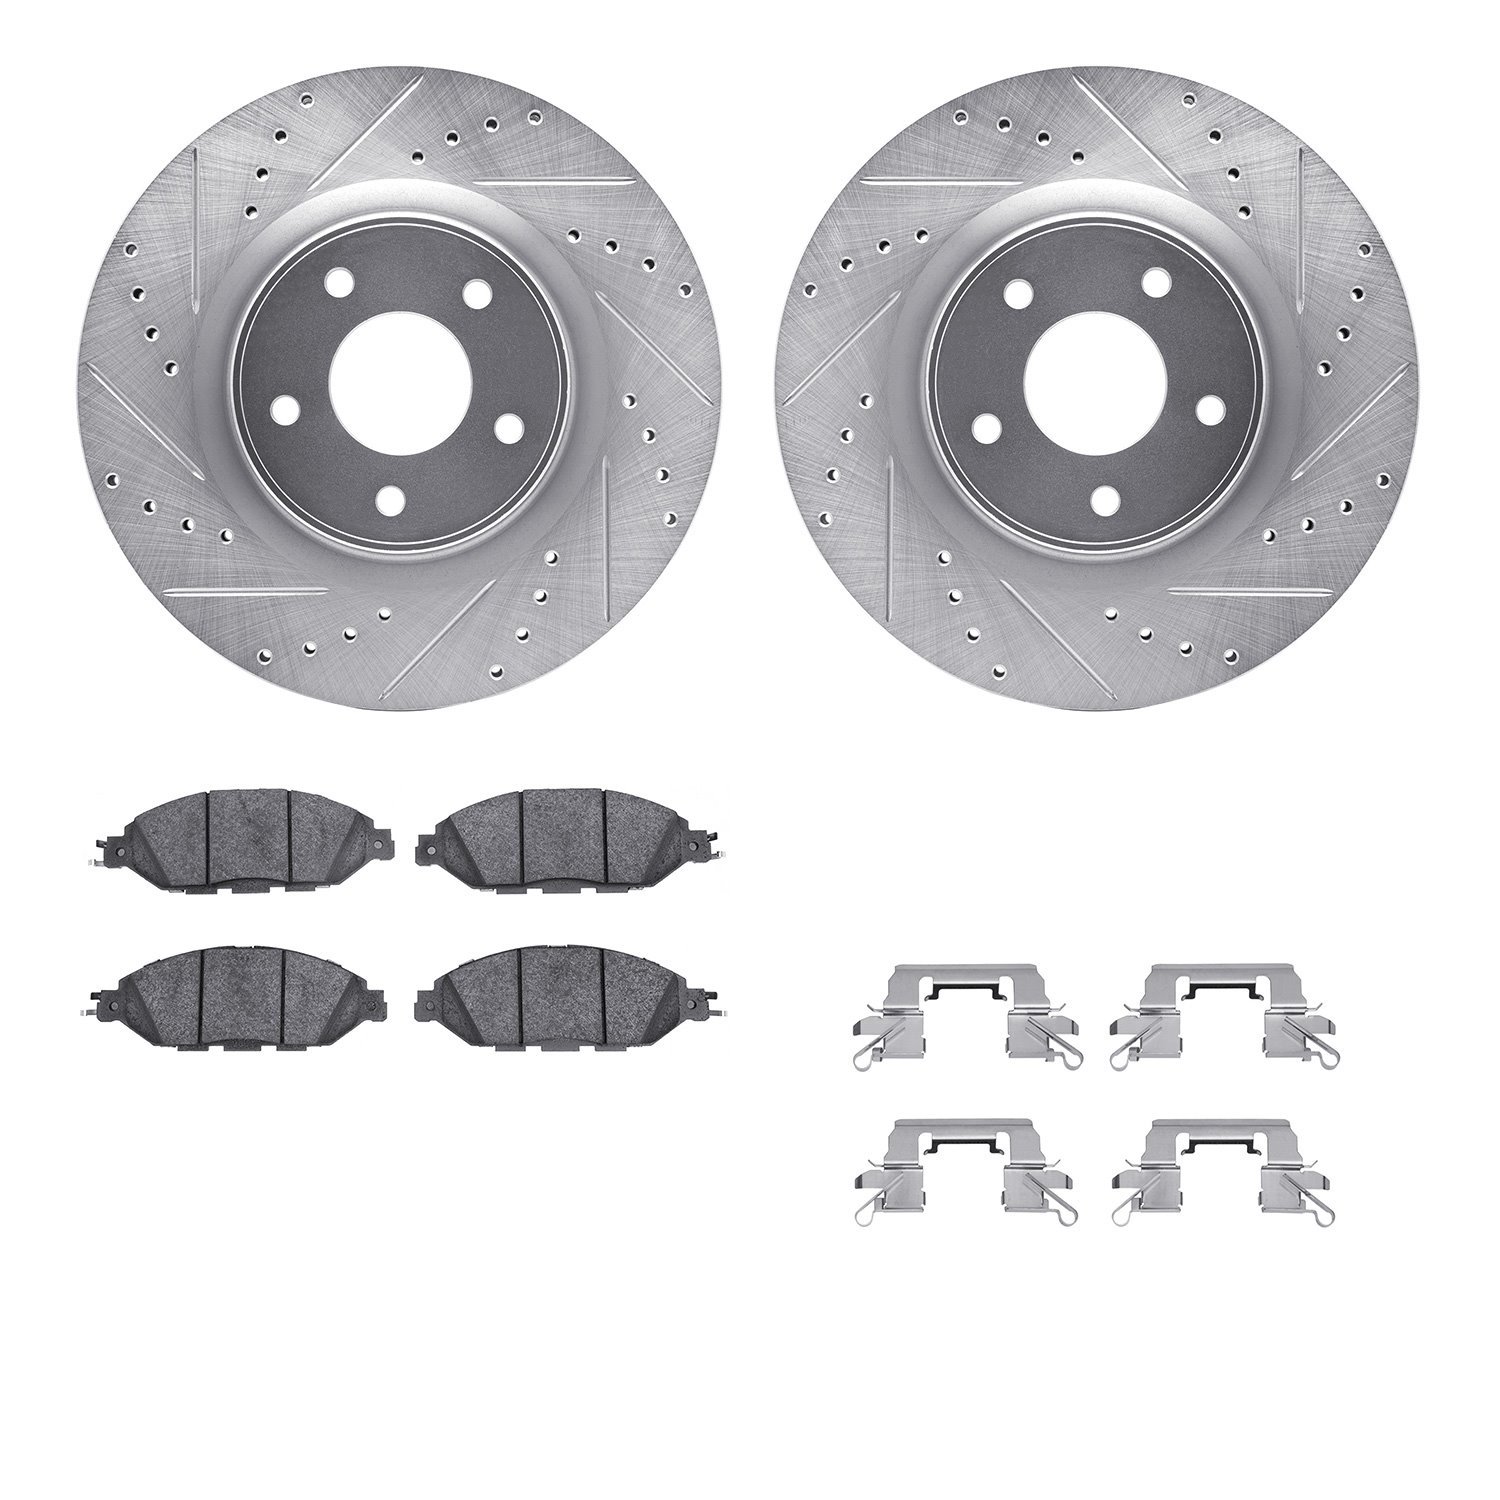 7512-67125 Drilled/Slotted Brake Rotors w/5000 Advanced Brake Pads Kit & Hardware [Silver], Fits Select Infiniti/Nissan, Positio